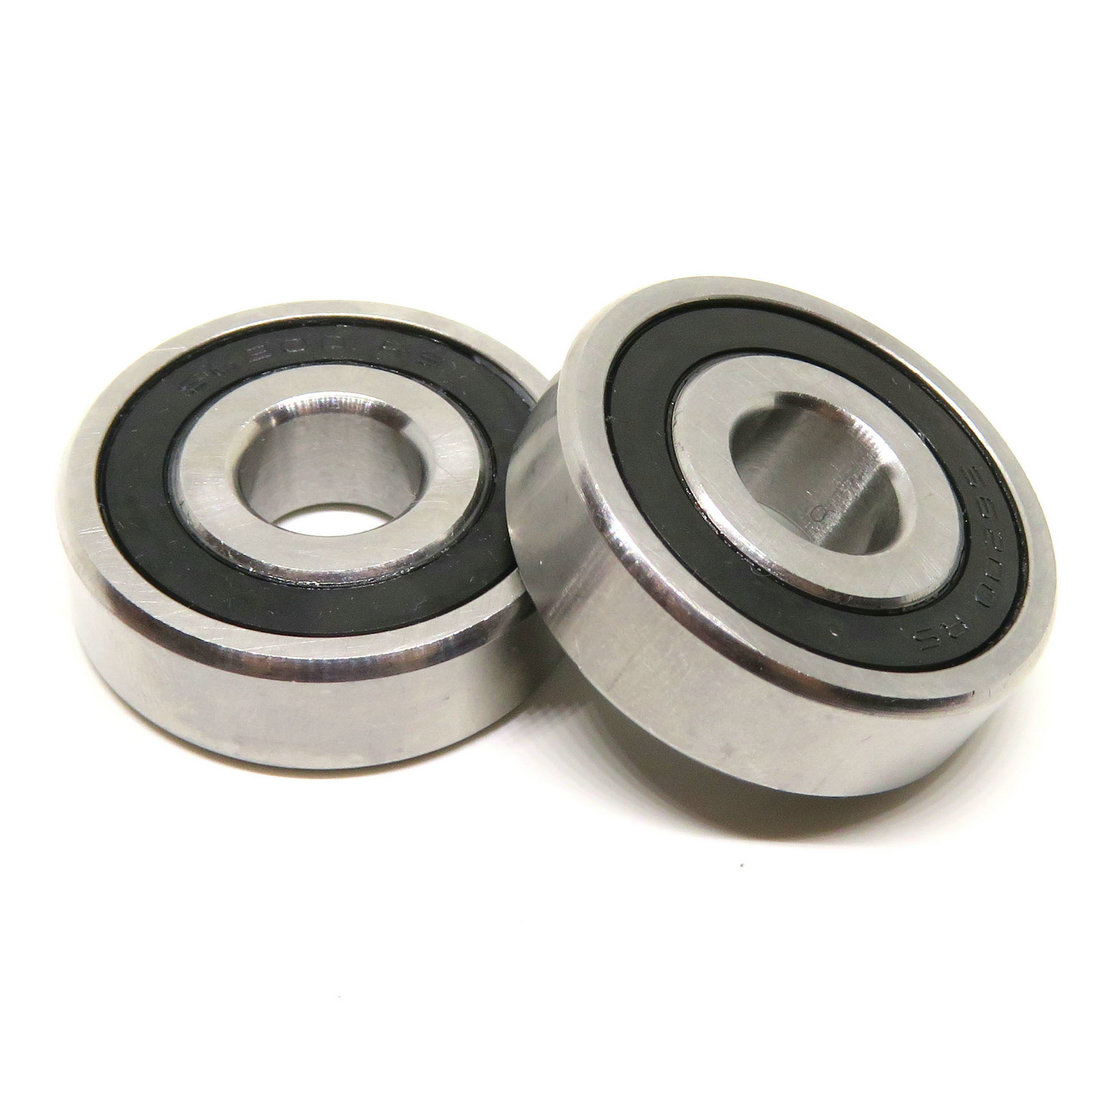 Corrosion-resistant S6305RS 25x62x17mm Stainless Steel Ball Bearing Double Rubber Seals S6305-2RS.jpg